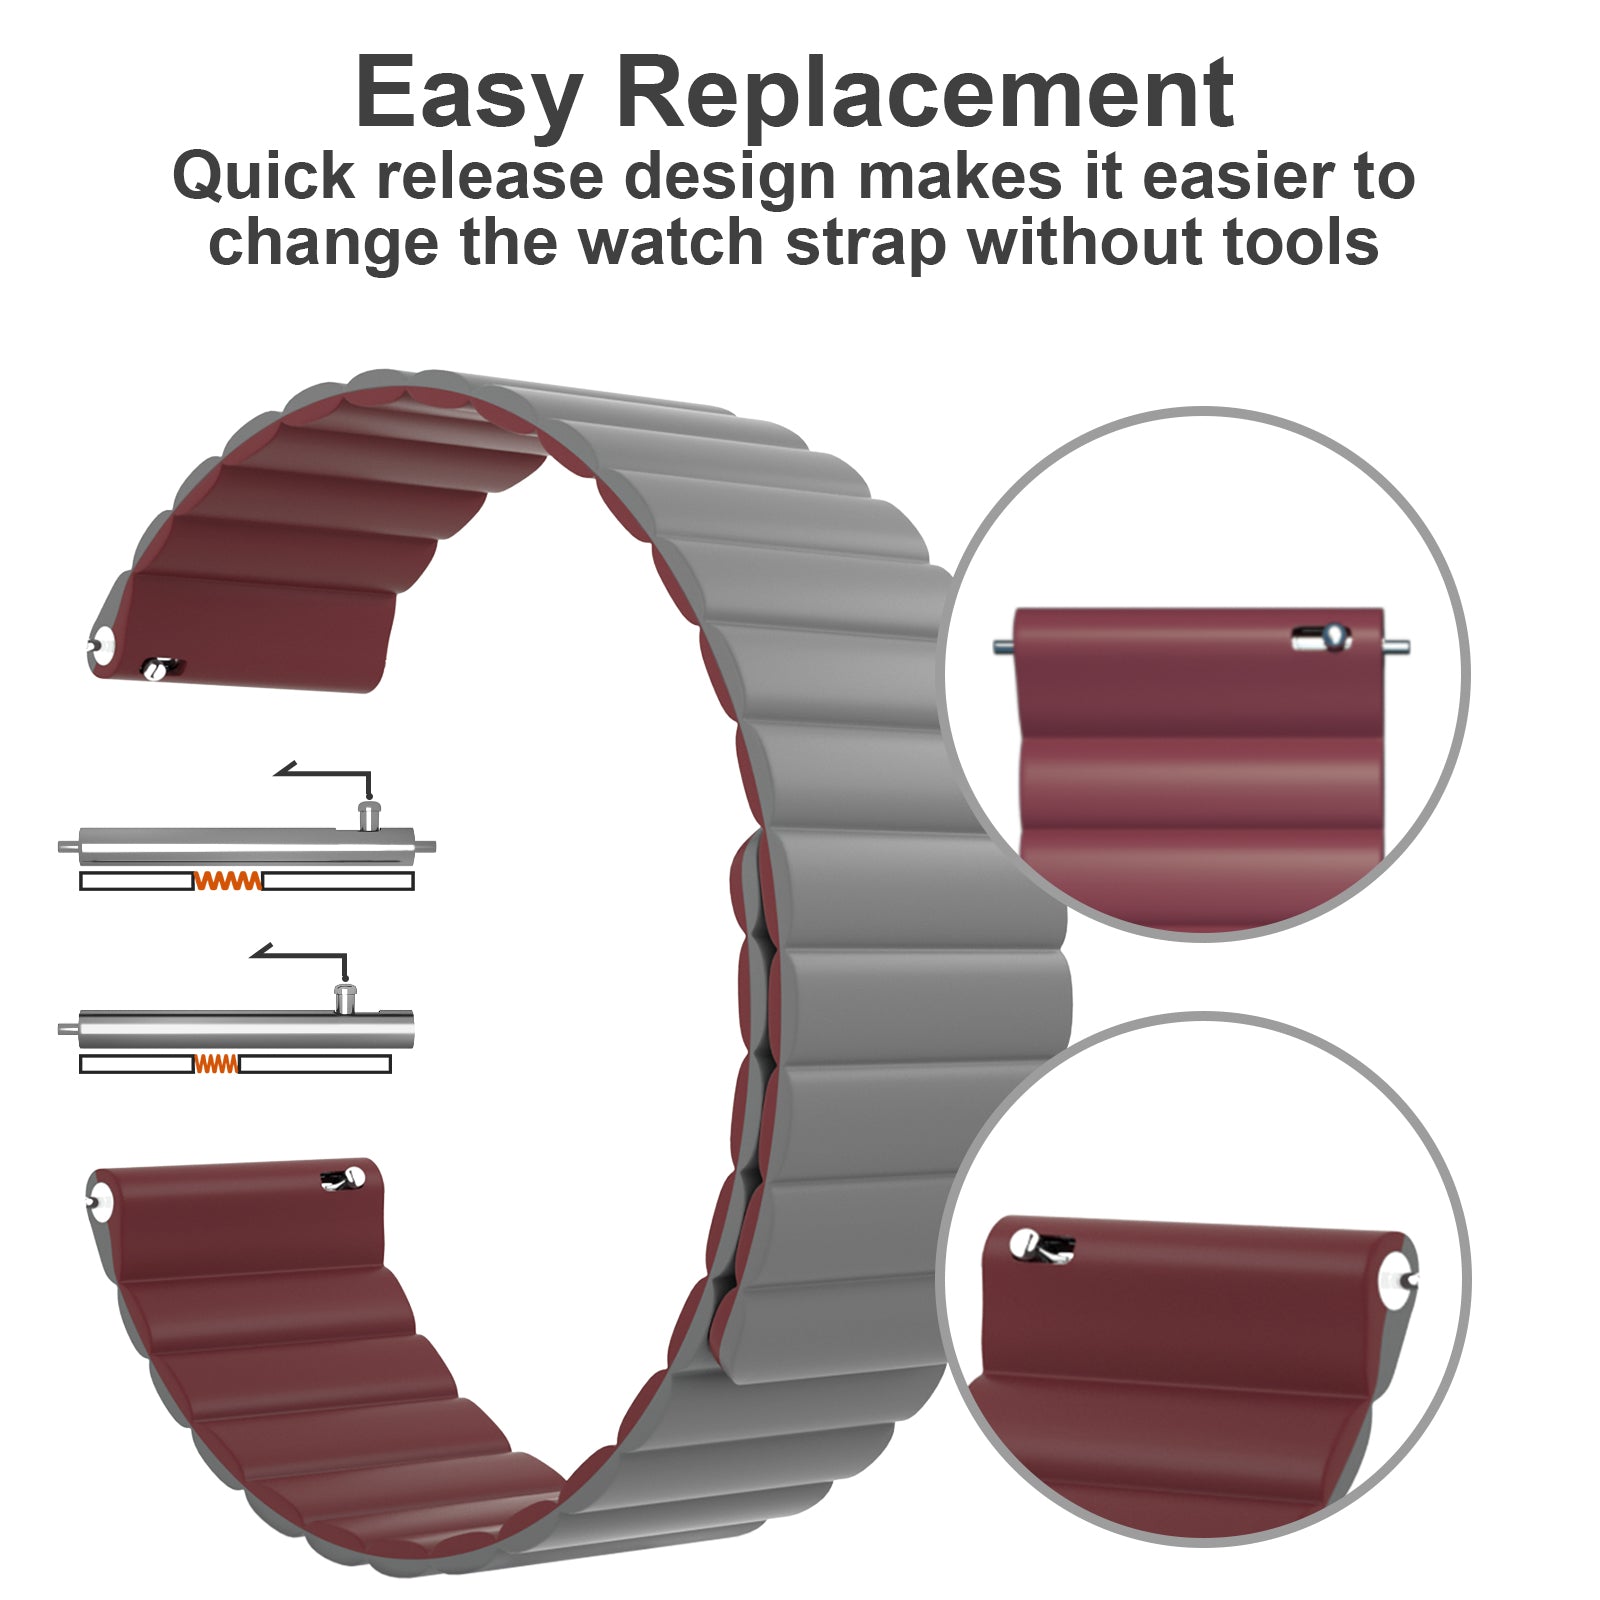 Quick release design makes it easier to change the watch strap without tools